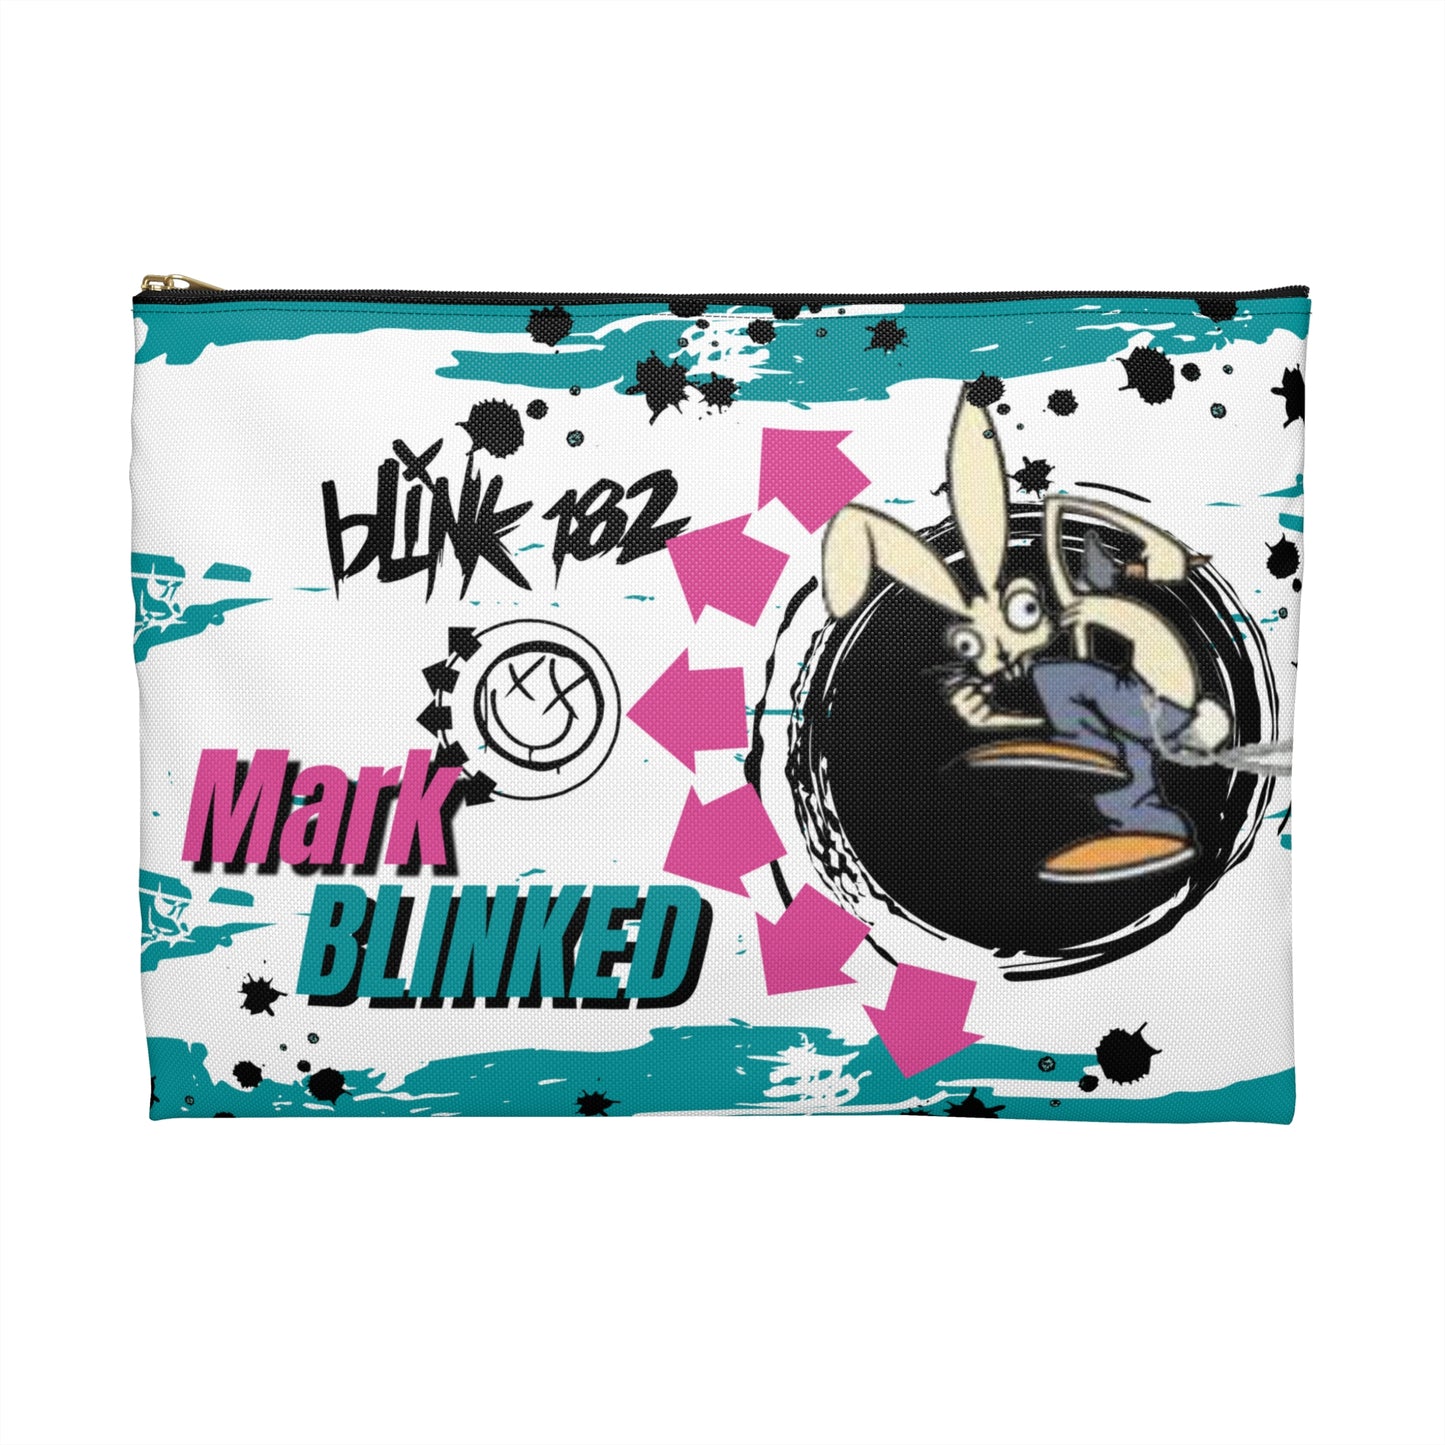 Blink 182 Accessory Pouch, All the Small Things: Mark